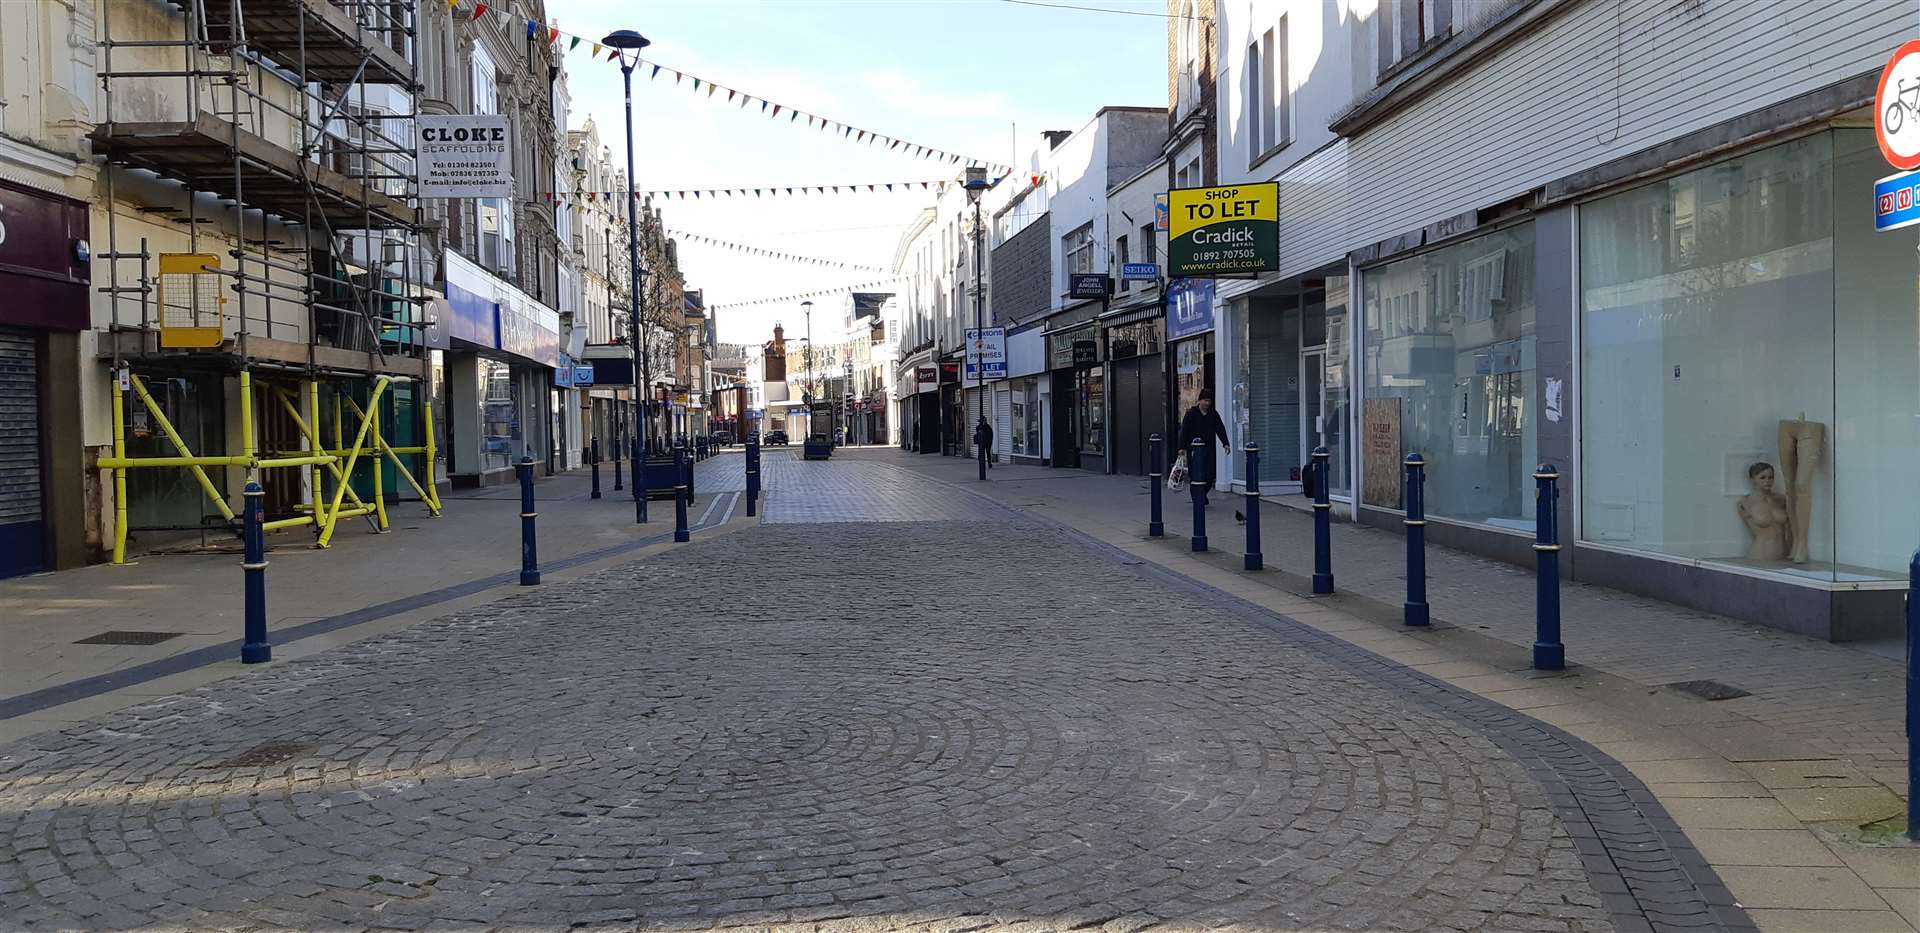 An abandoned Biggin Street during the first lockdown, March 24, 2020